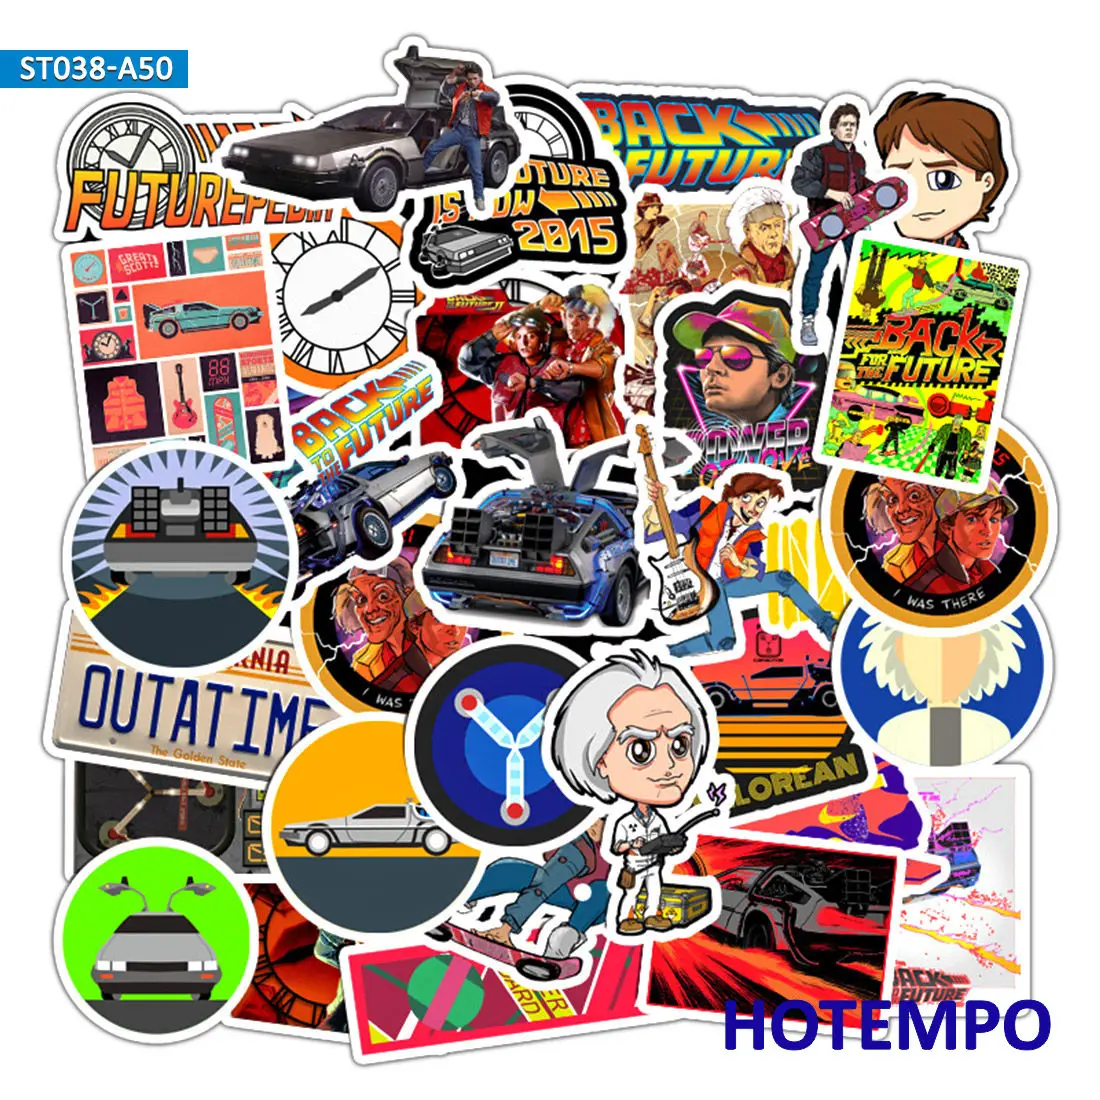 50pcs Classic Movie Back To The Future Style Mixed Decals Stickers Pack for DIY Phone Laptop Luggage Skateboard Bike Car Sticker